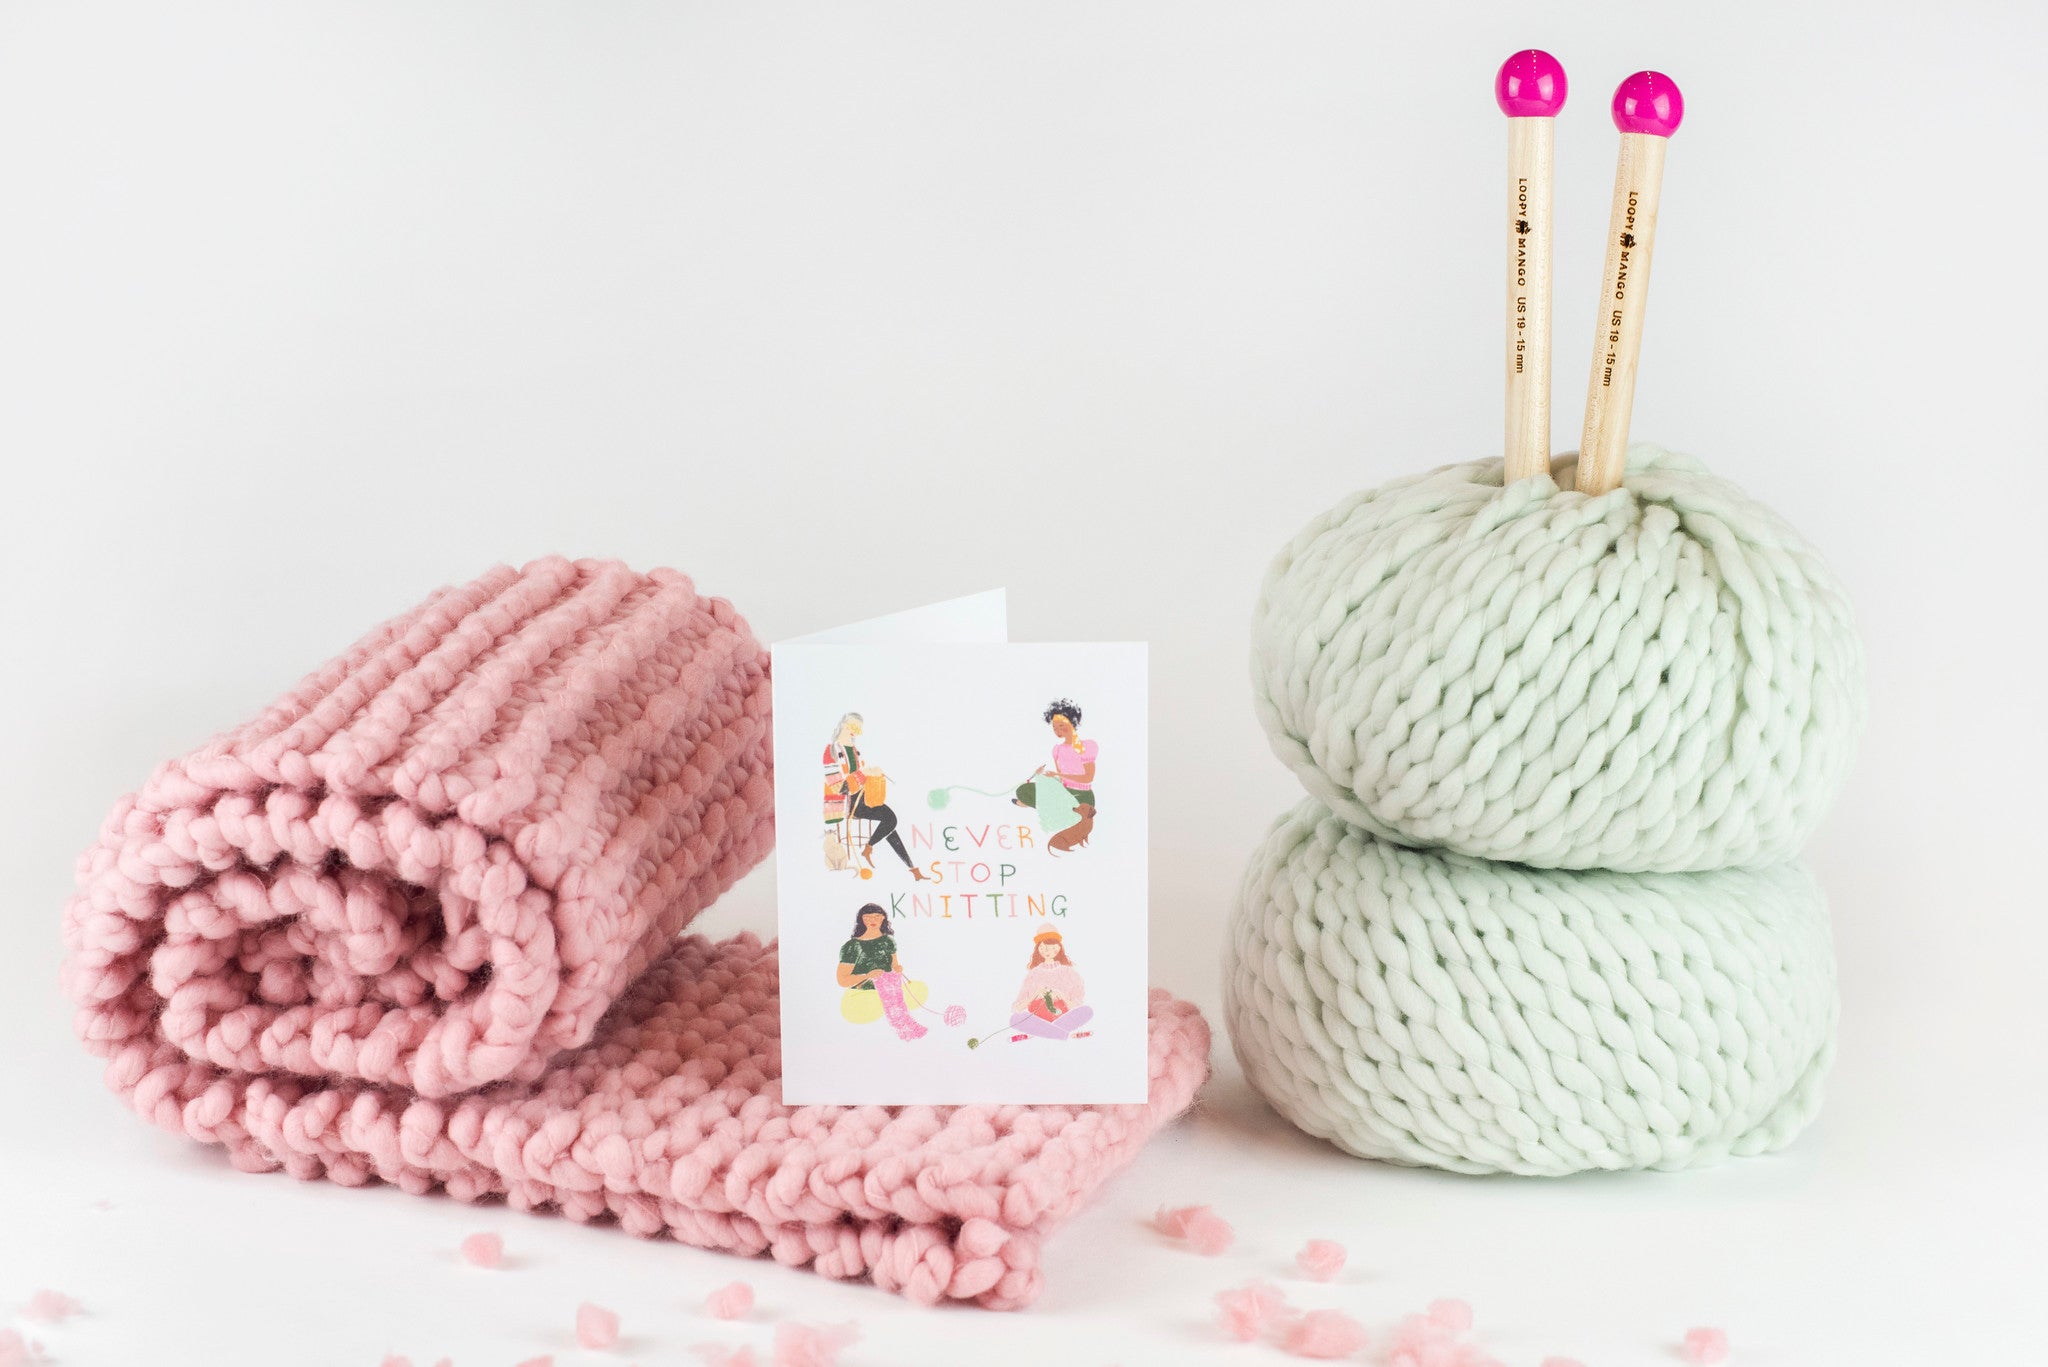 Learn to Knit Kit: Includes Needles and Yarn for Practice and for Making  Your First Scarf-featuring a 32-page book with instructions and a project